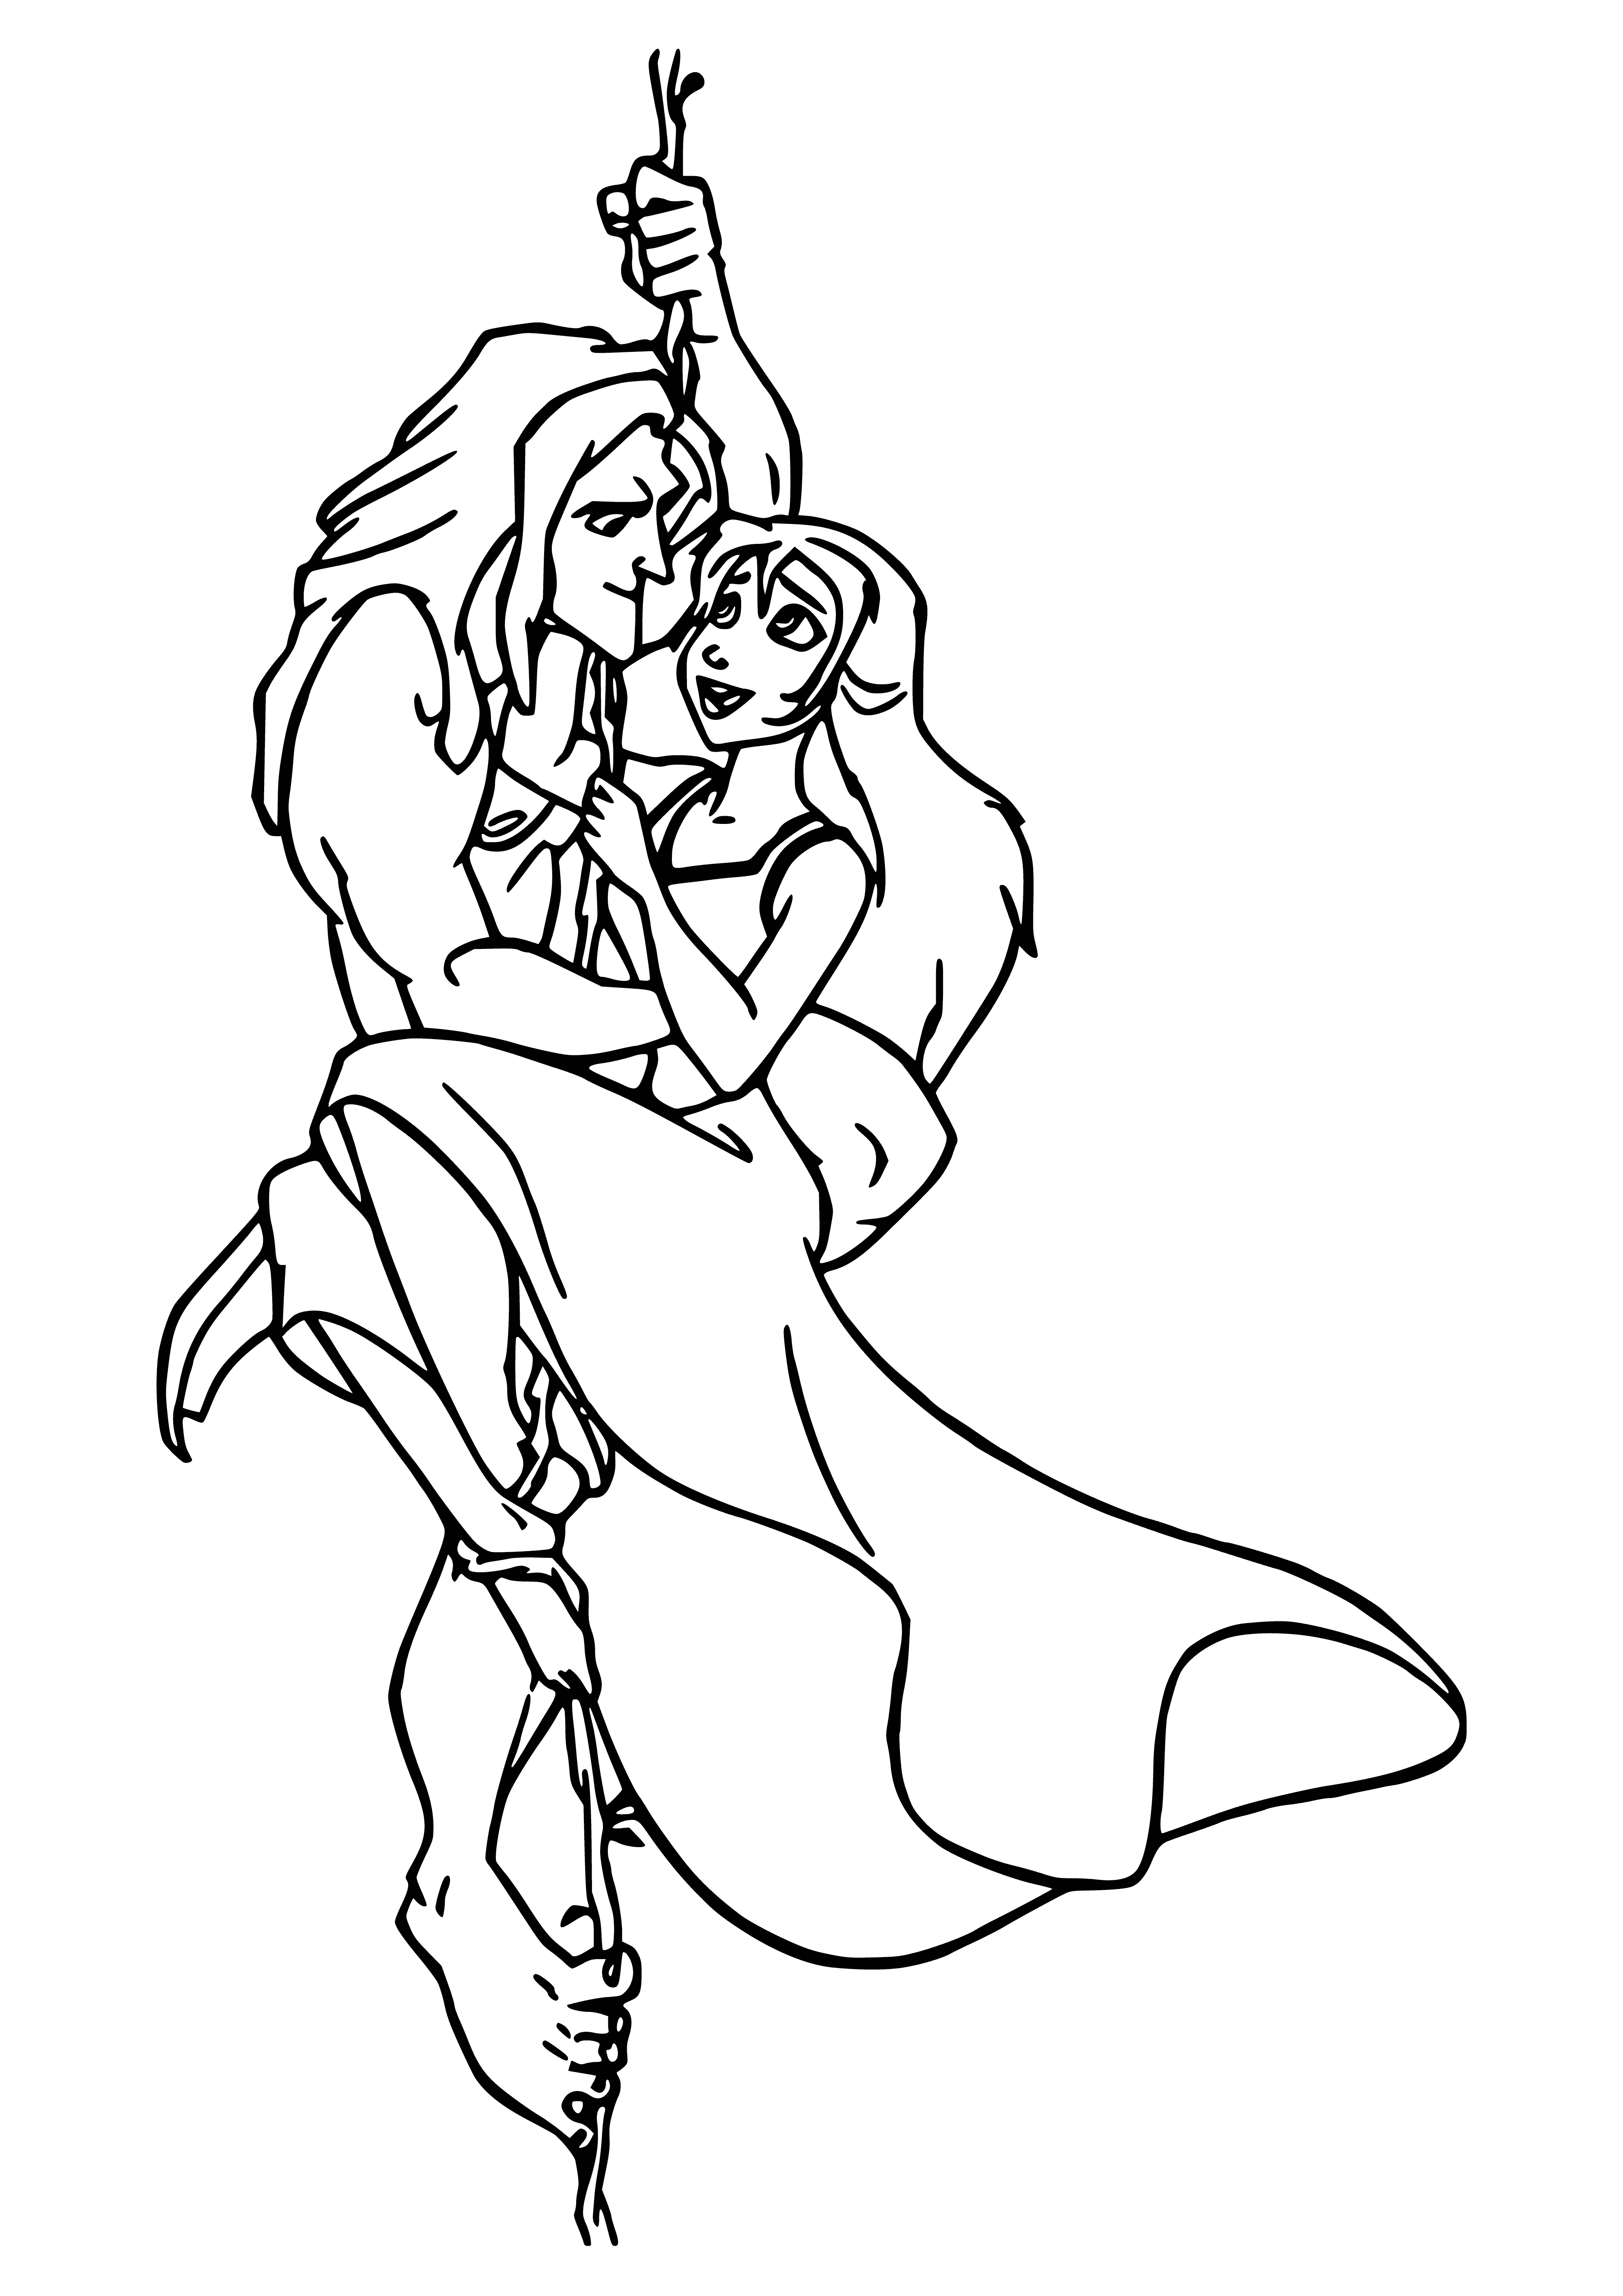 coloring page: Jane is embraced by Tarzan with hand on her cheek and eyes closed, smiling.